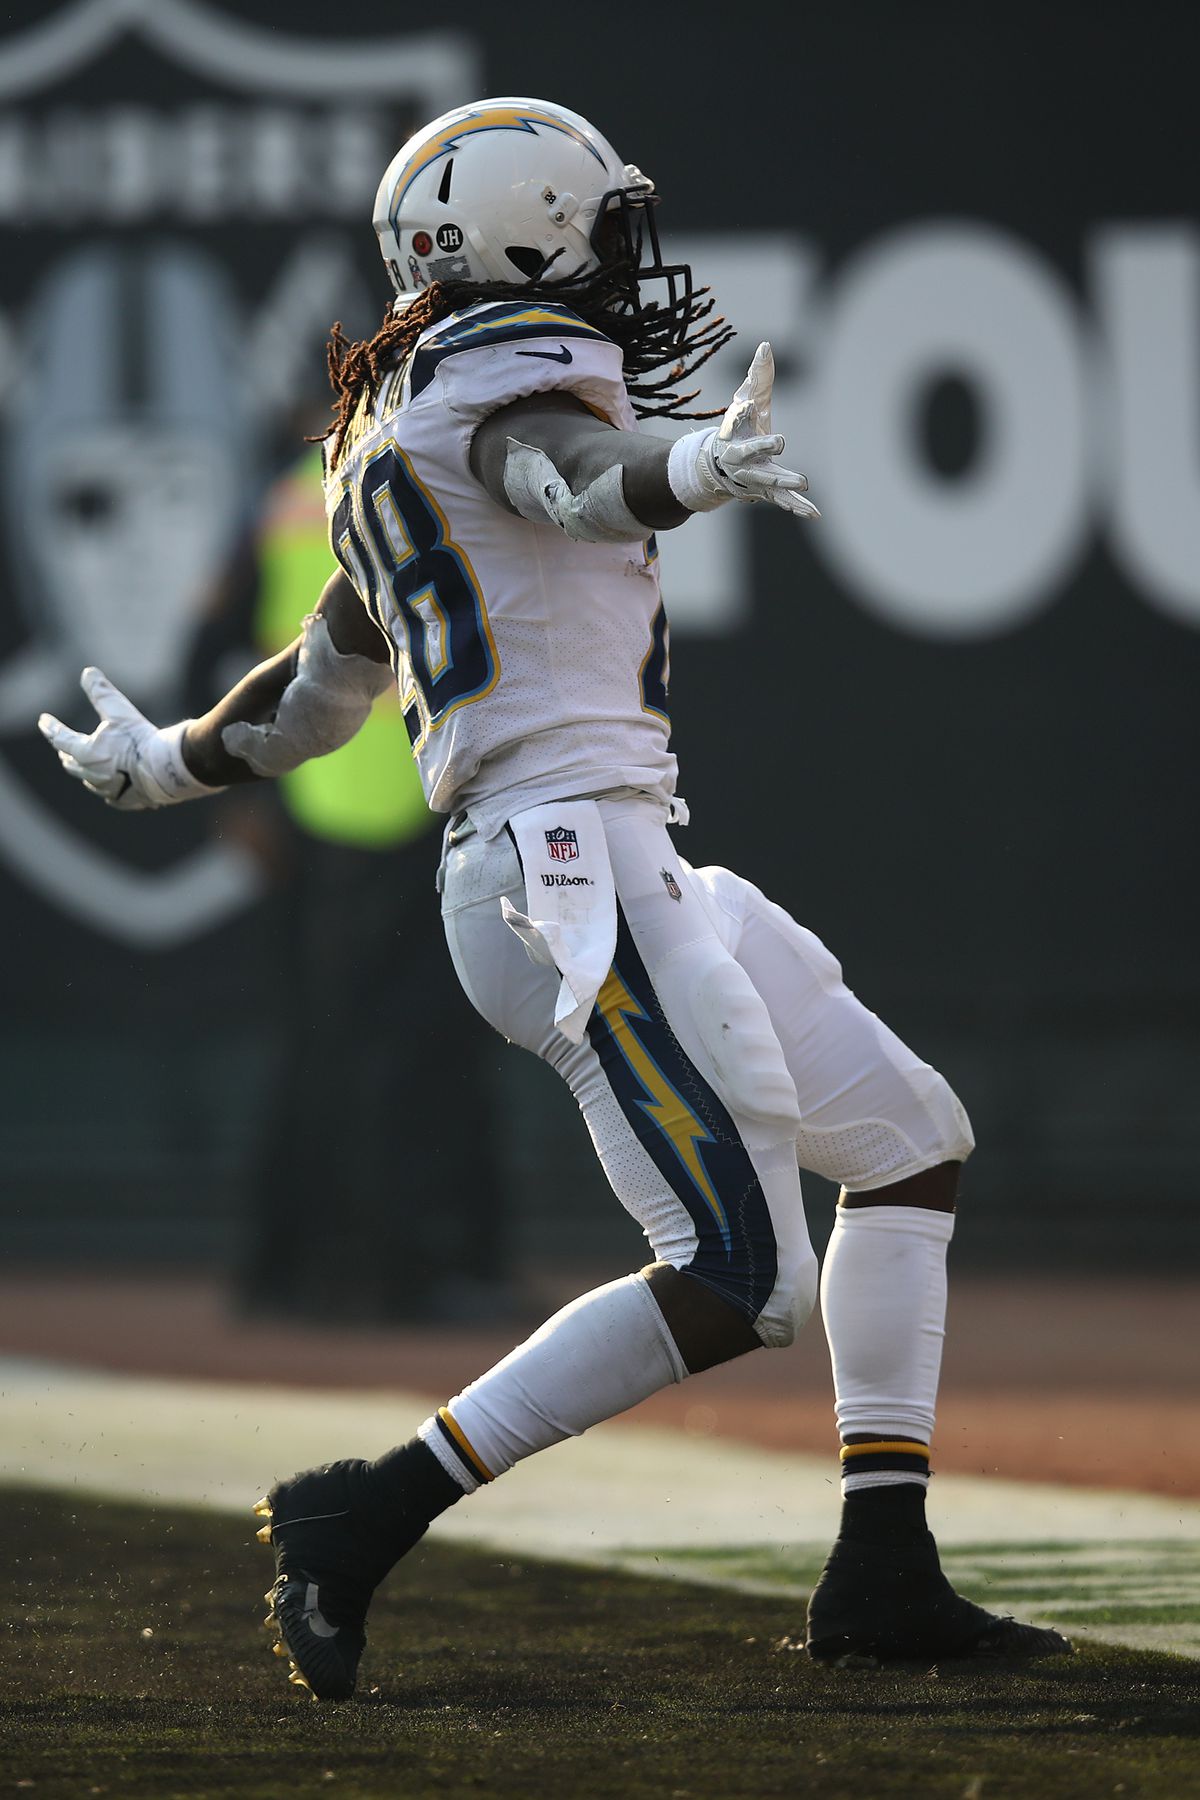 Los Angeles Chargers v Oakland Raiders